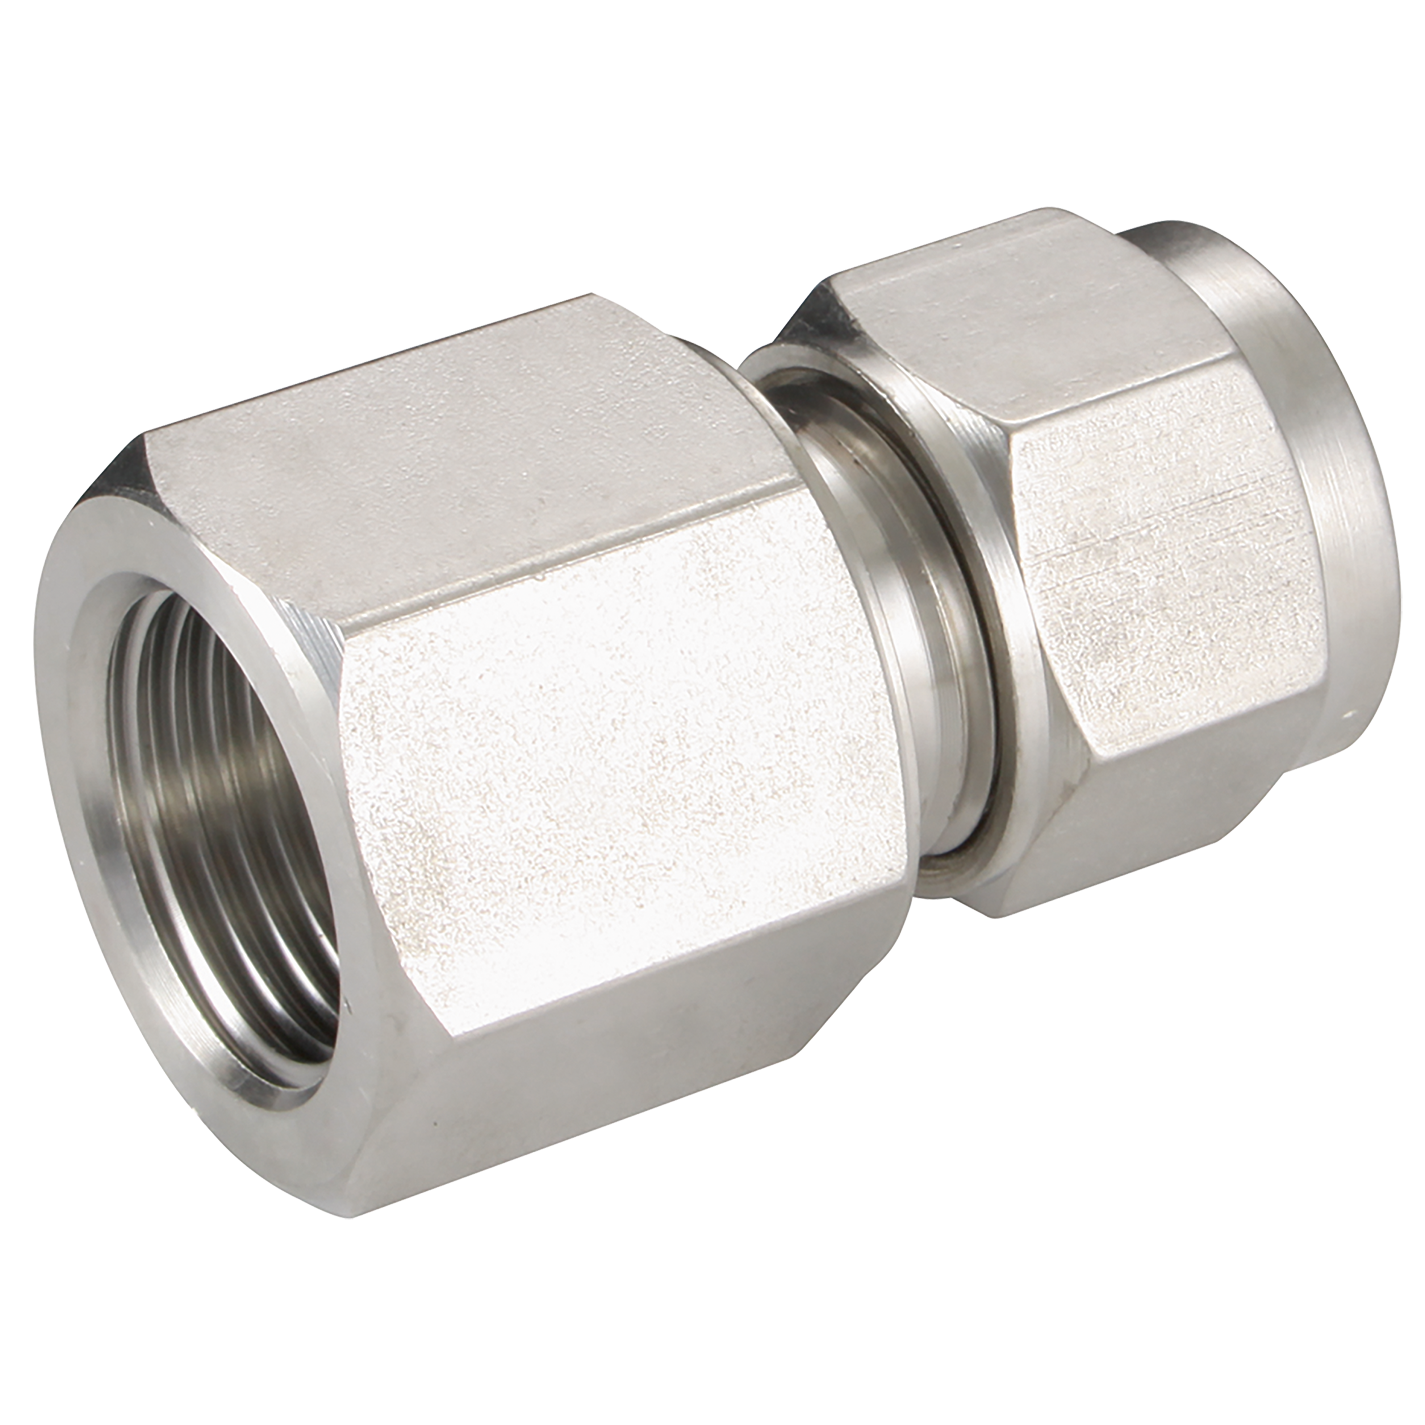 FEMALE CONNECTOR 3 OD 1/4 BSPP